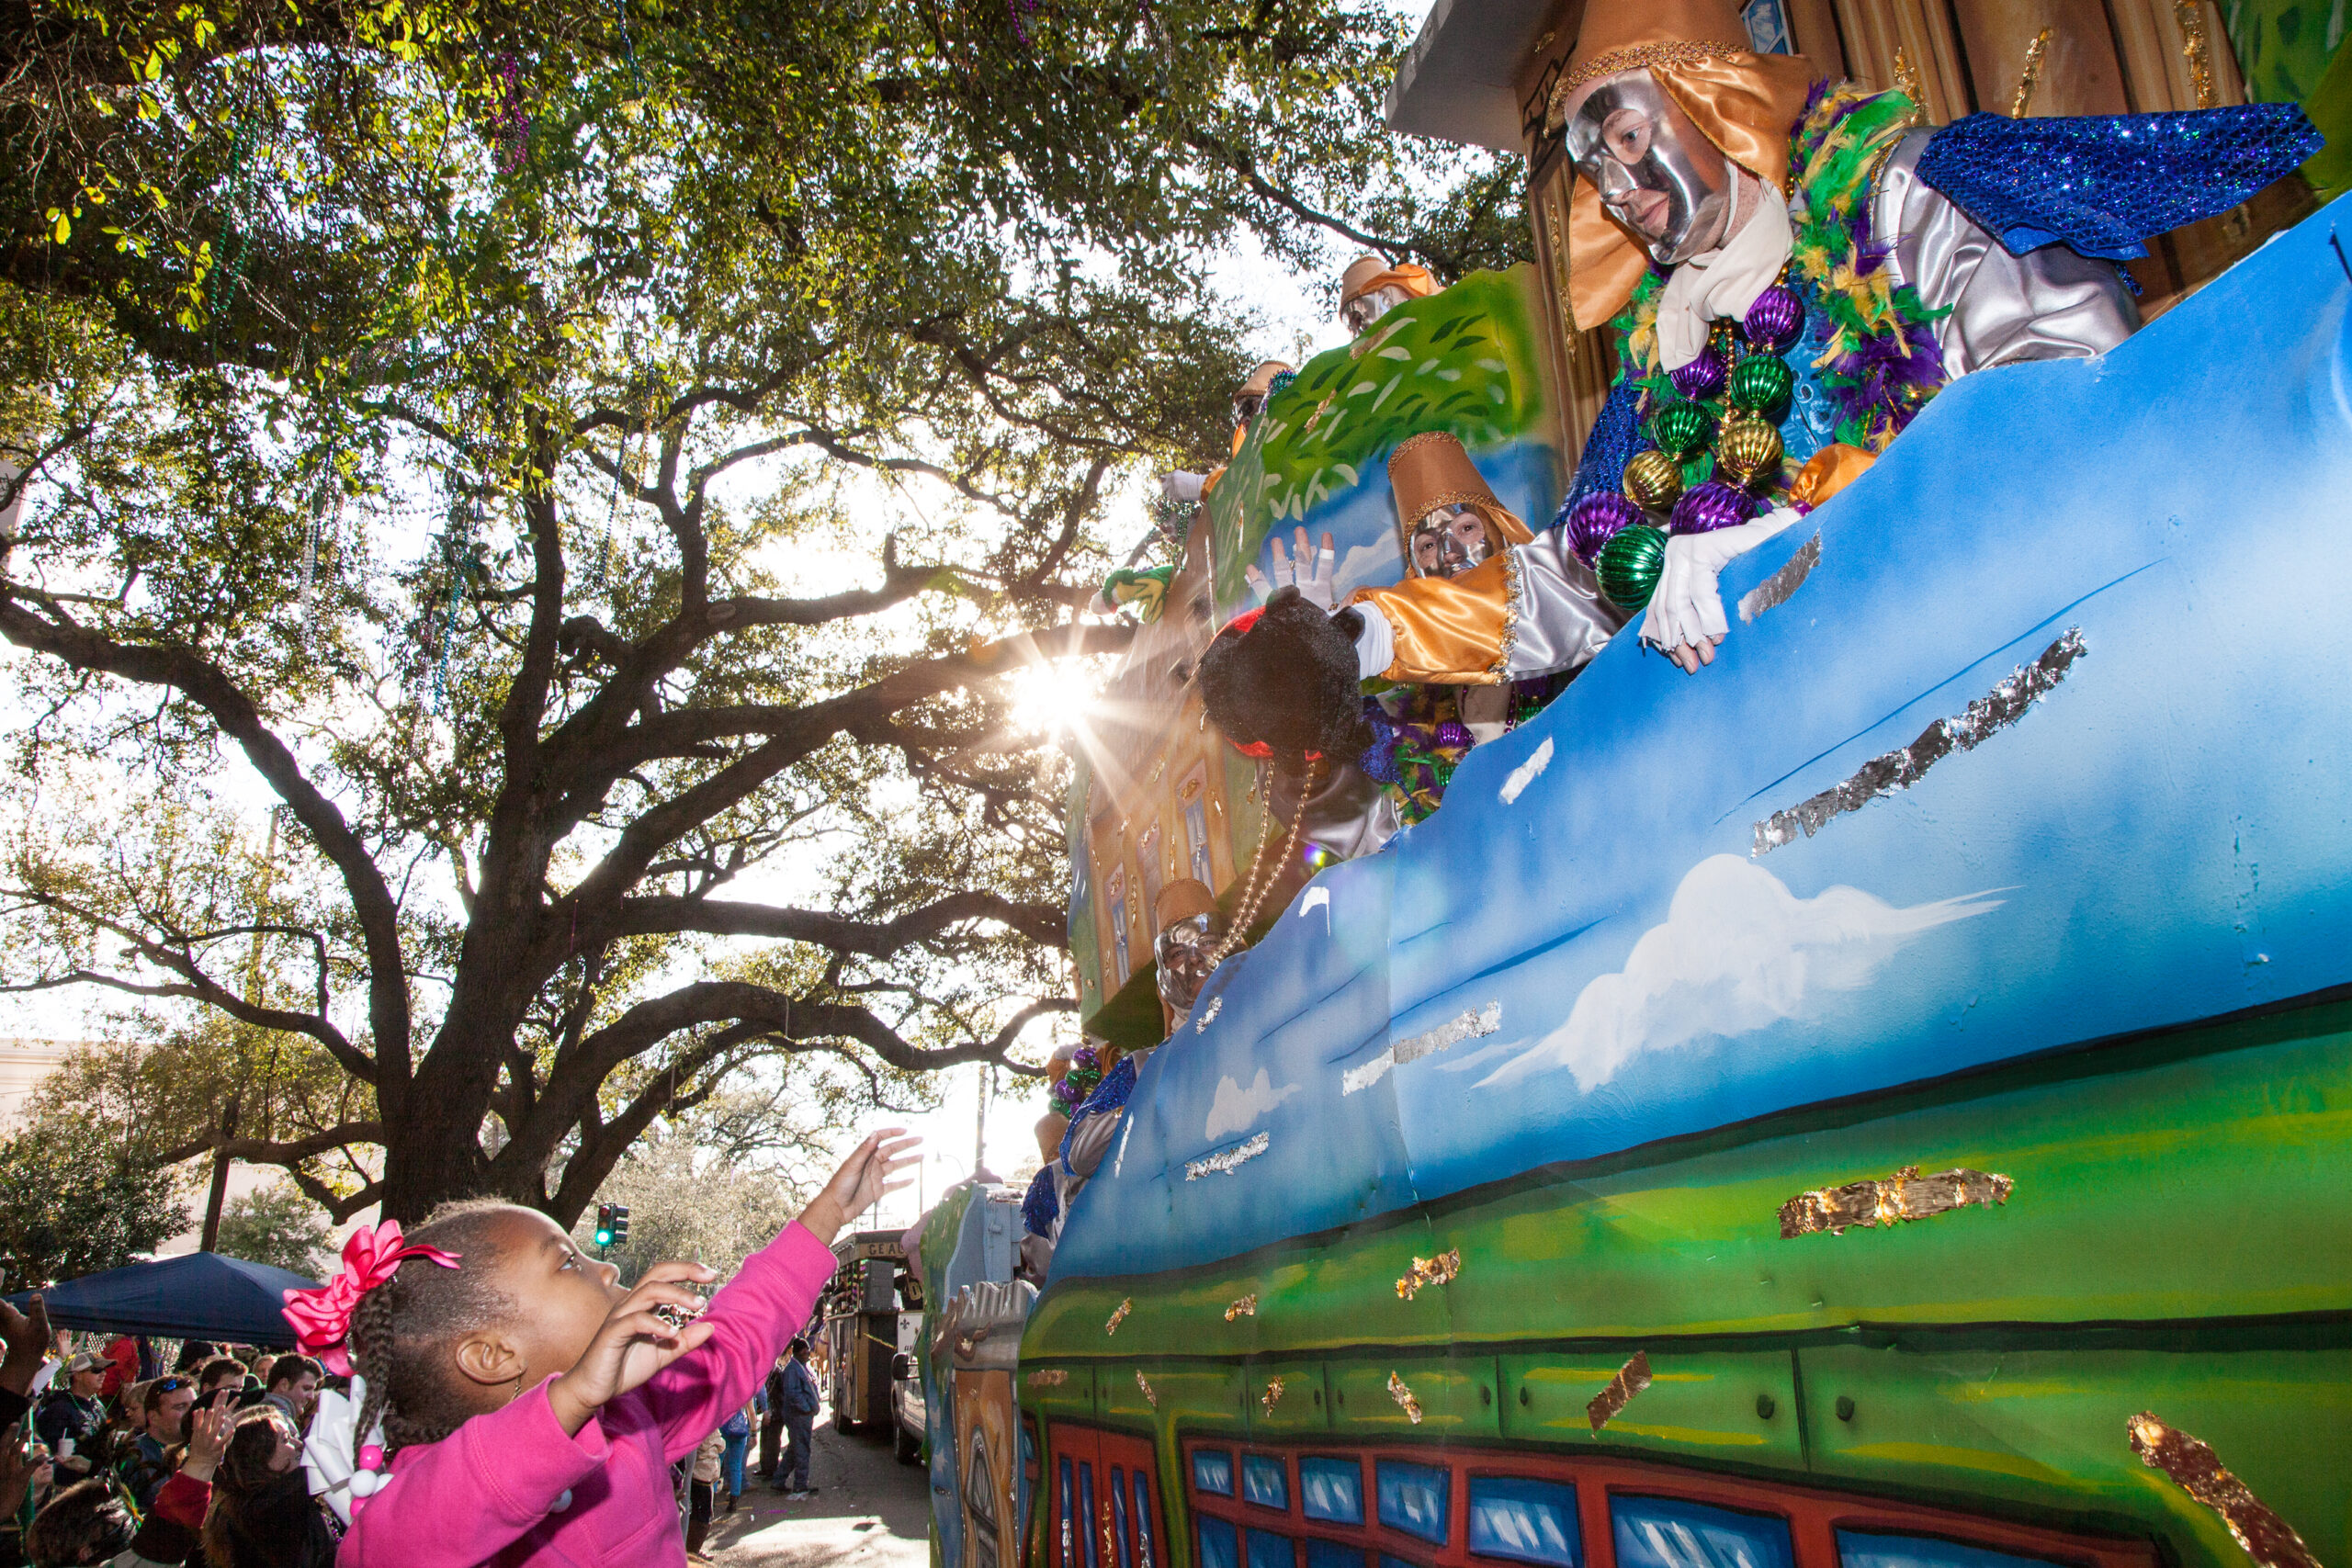 Mardi Gras magic: In conversation with a New Orleans legend